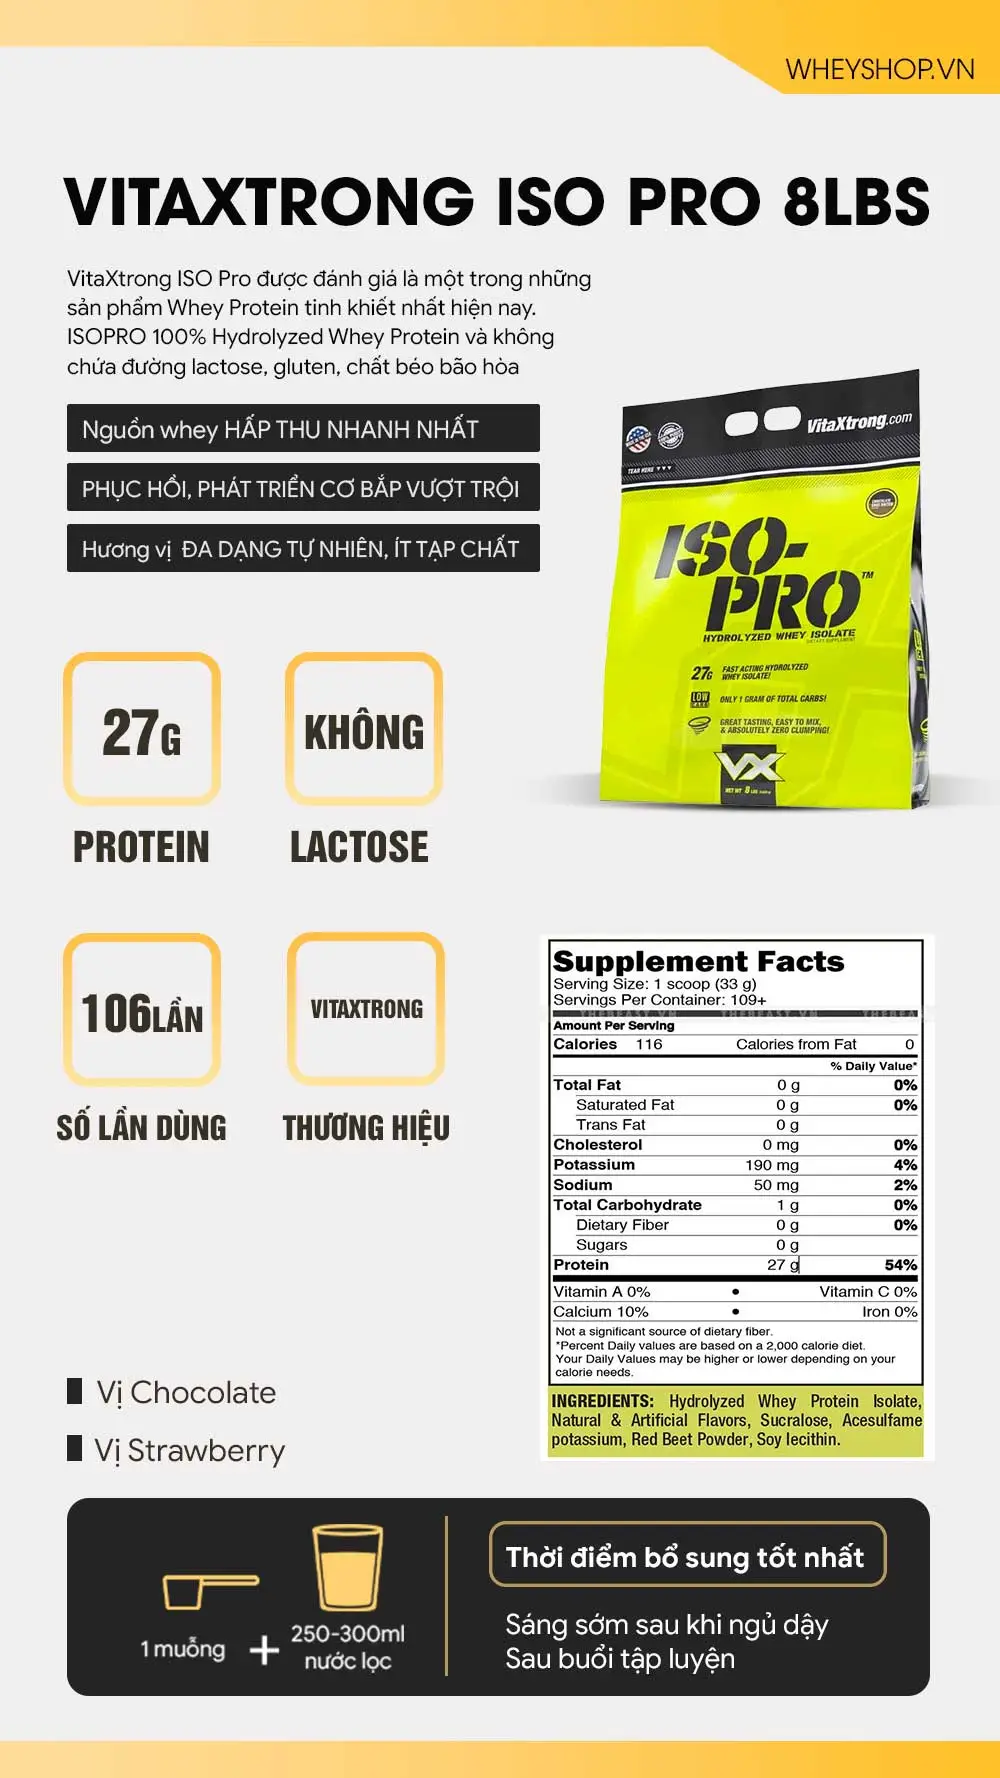 vitaxtrong-iso-pro-8lbs-3-6kg